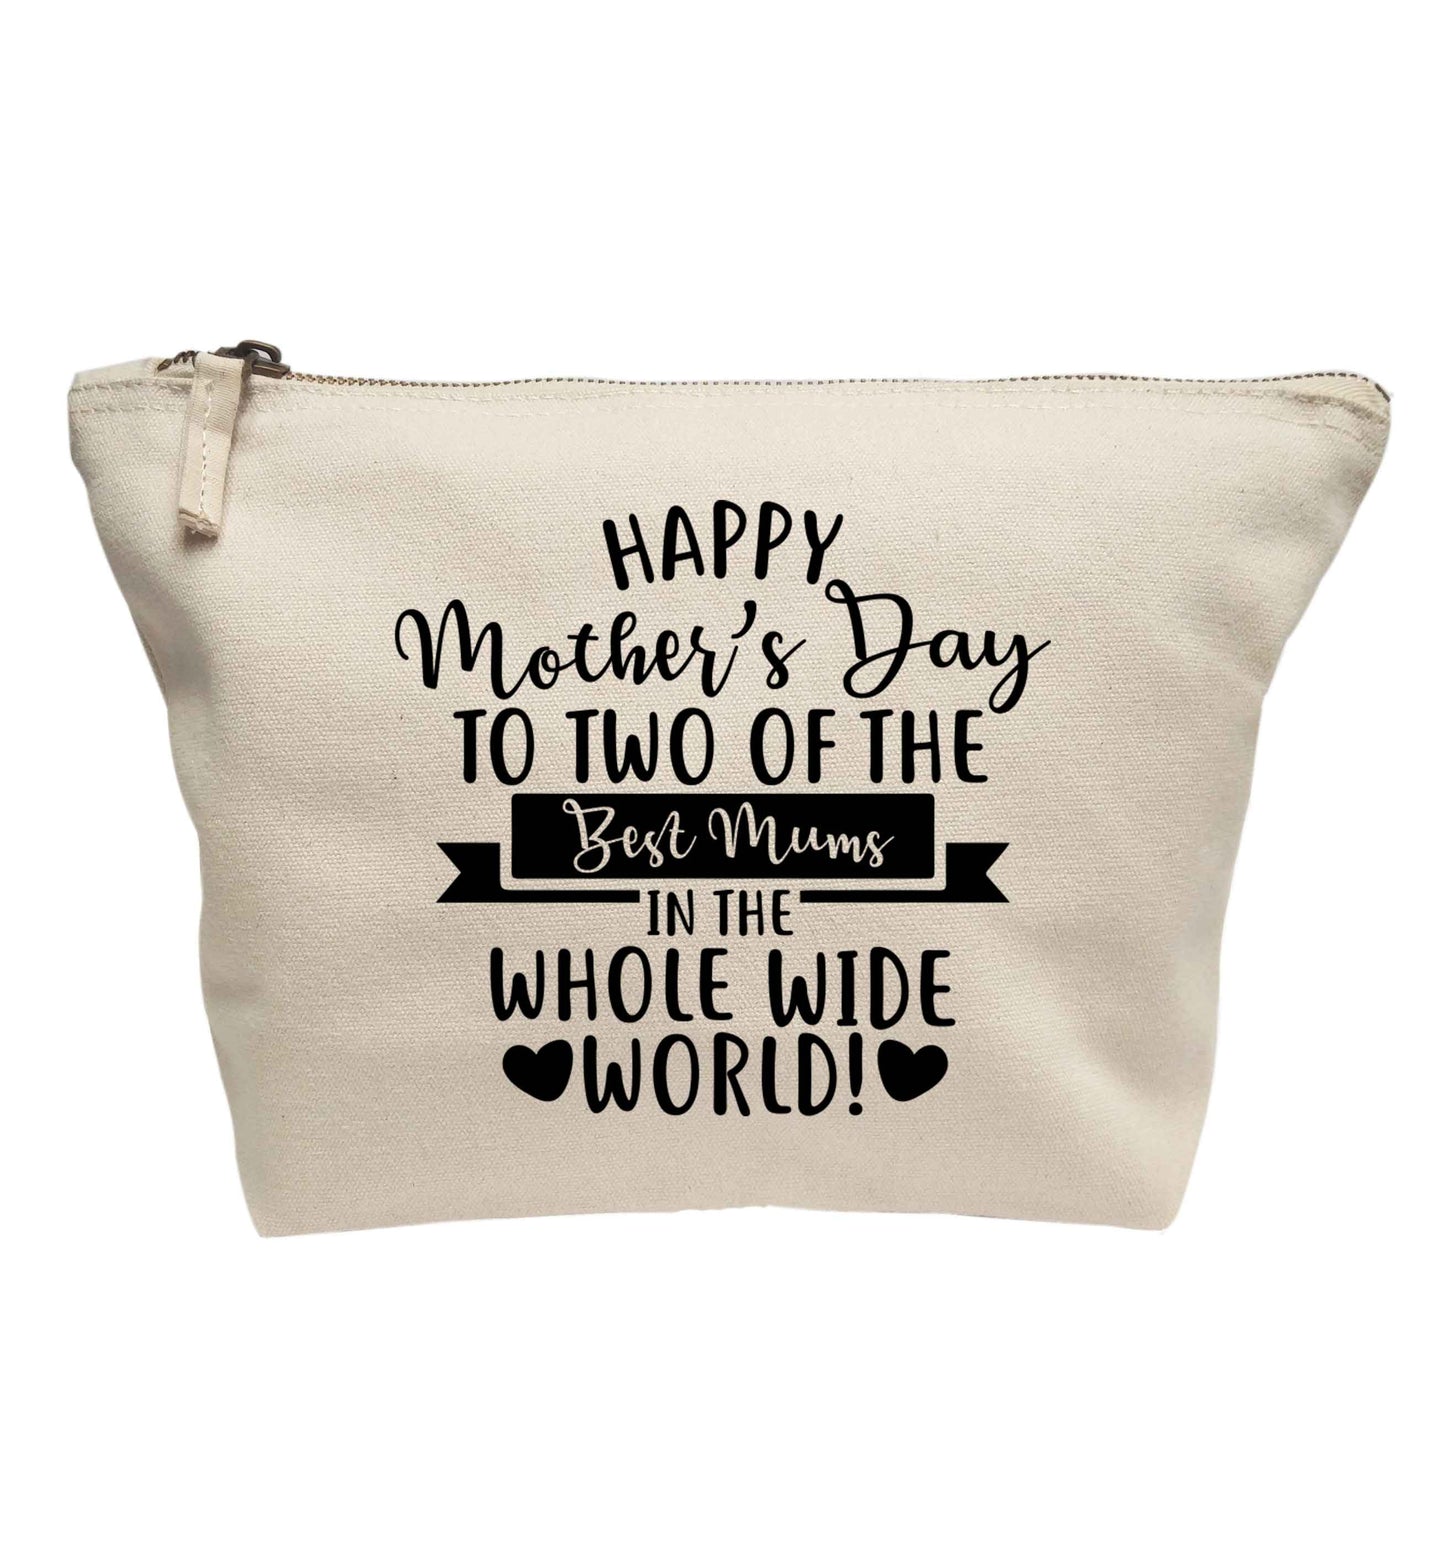 Happy mother's day to two of the best mums in the whole wide world | Makeup / wash bag